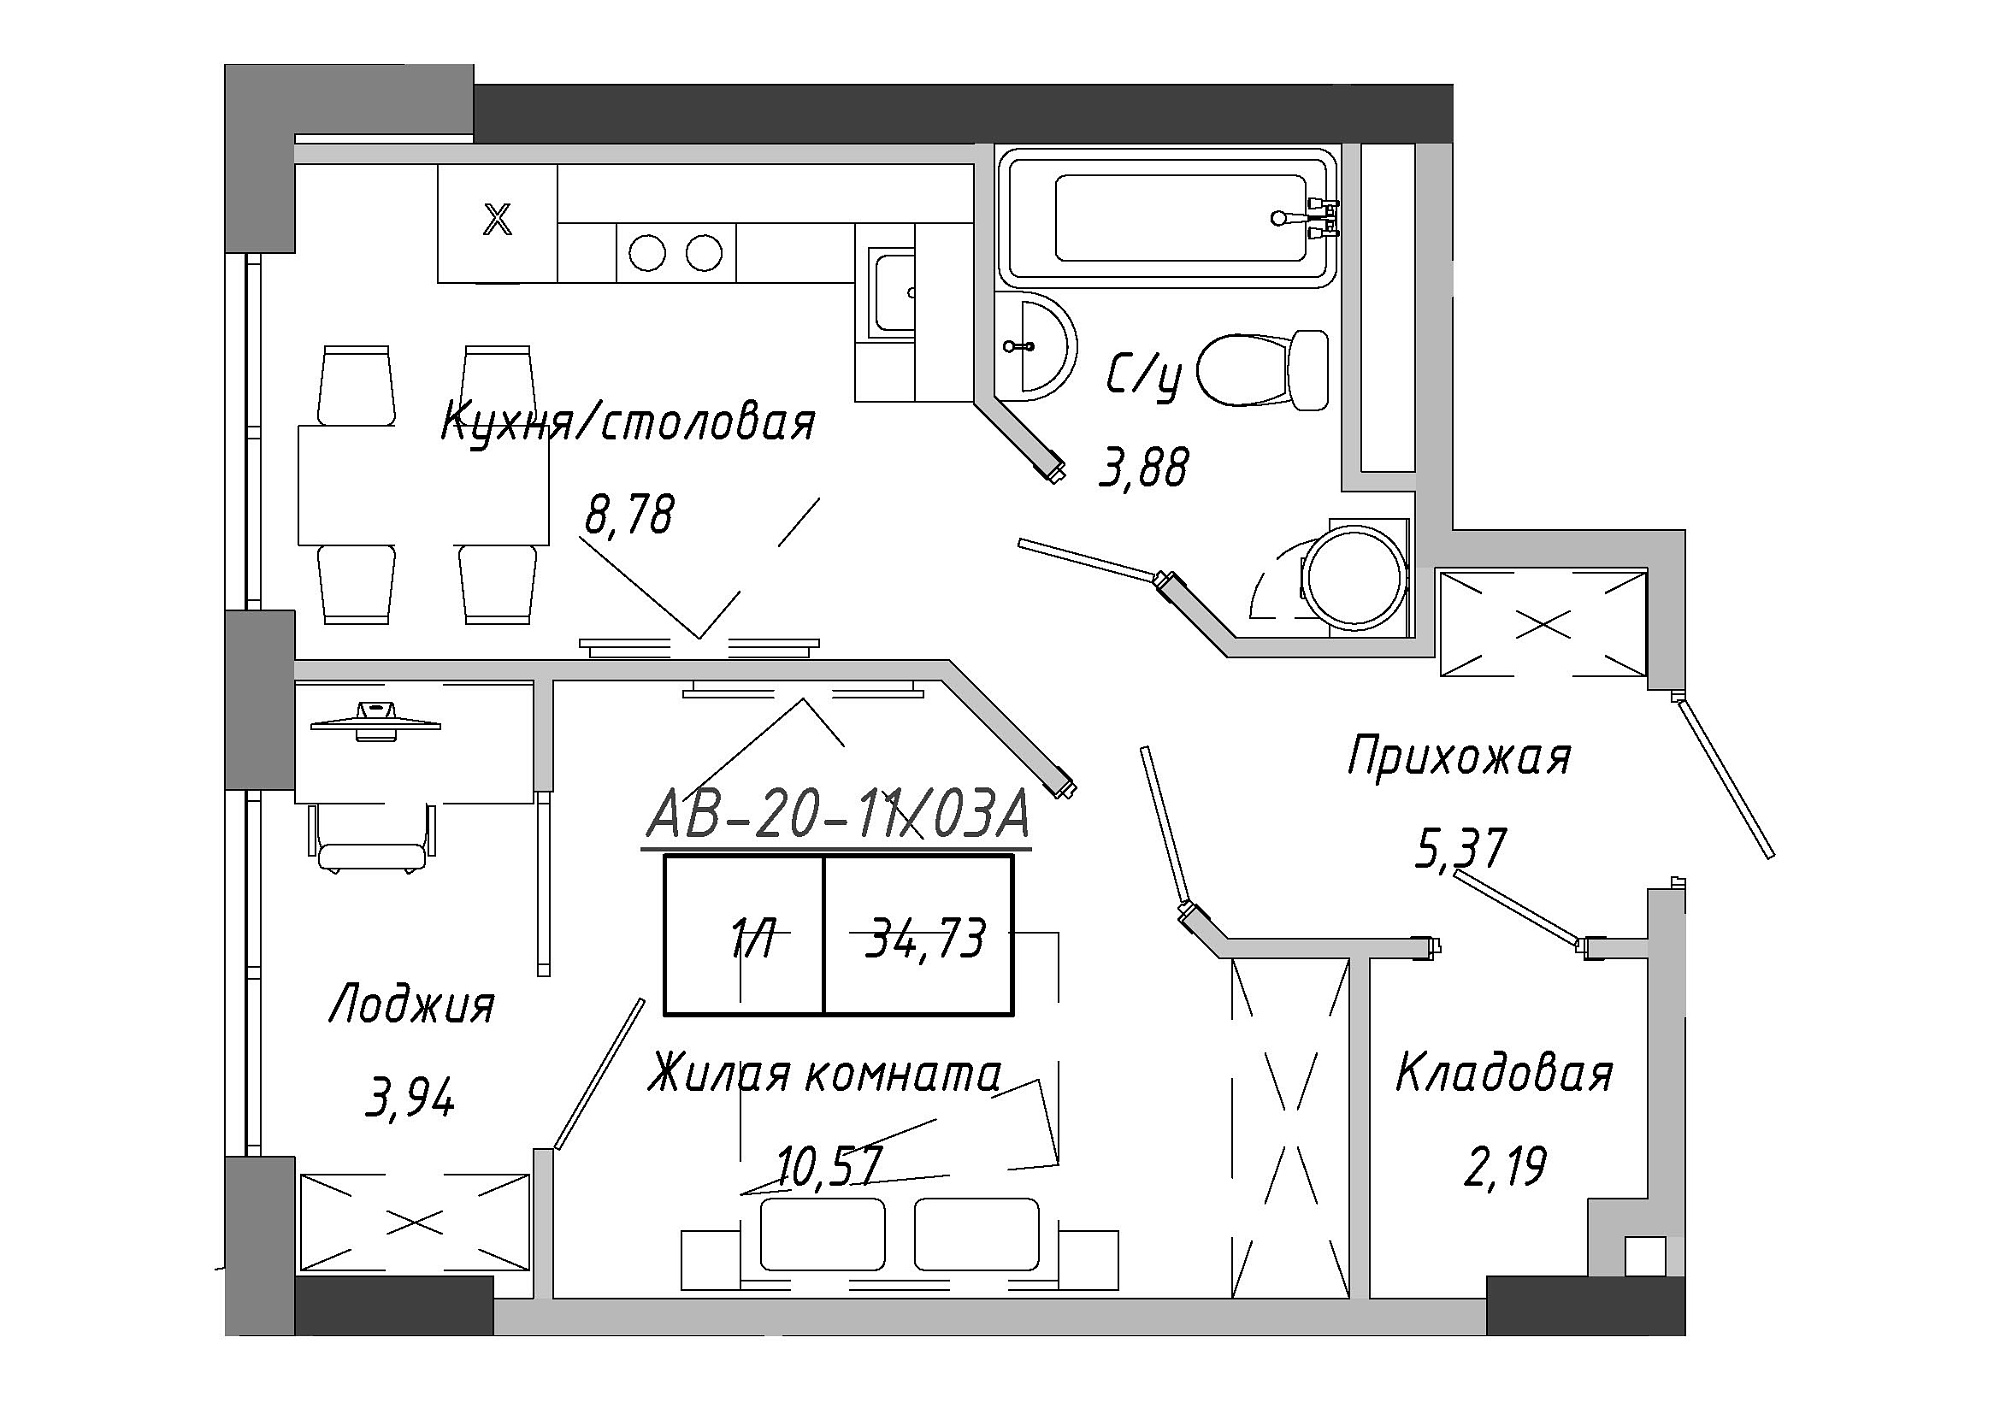 Planning 1-rm flats area 35.26m2, AB-20-11/0003а.